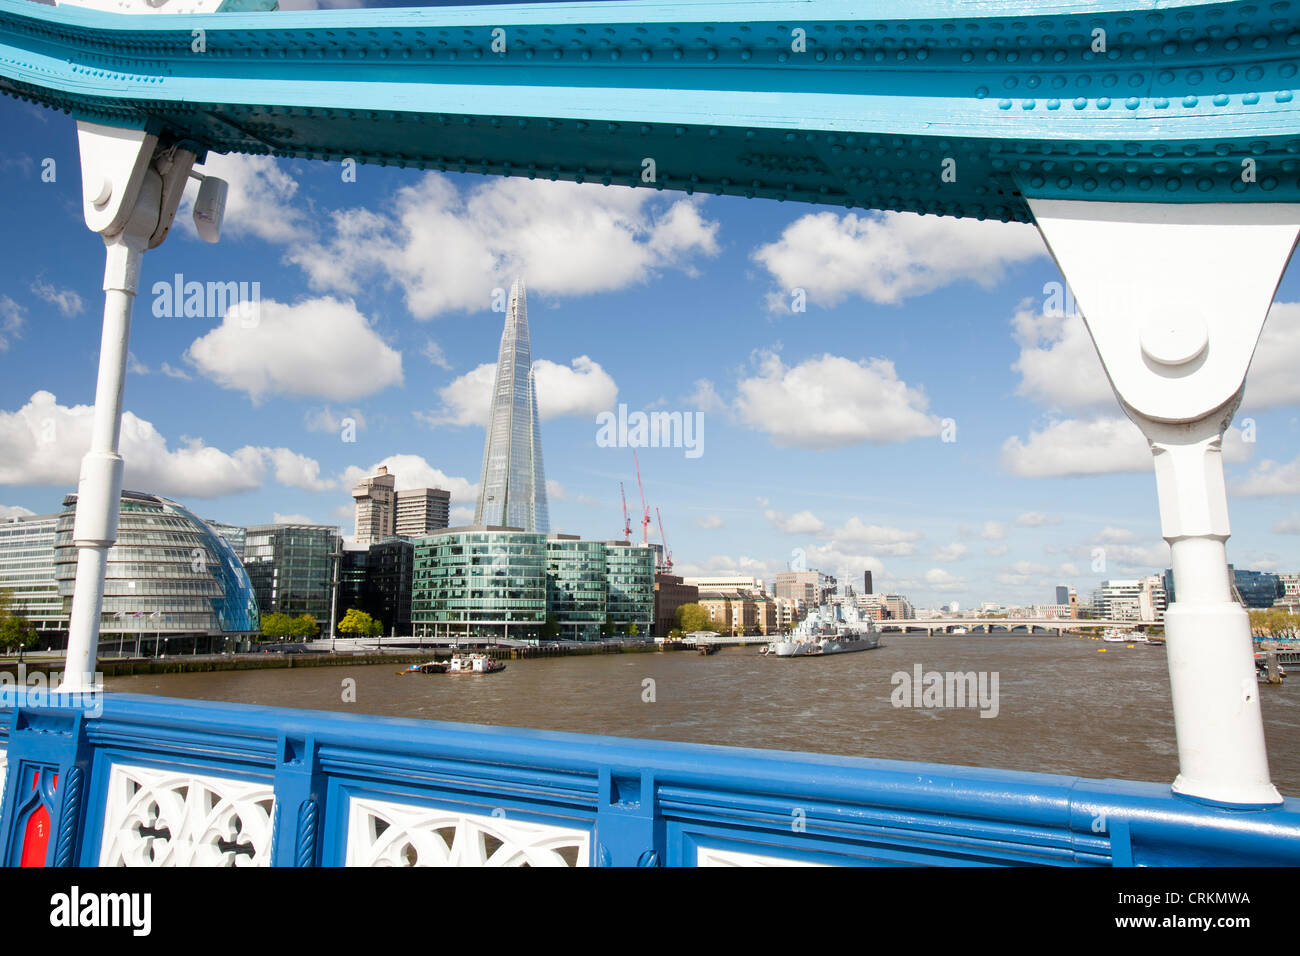 The Tower Bridge and the Shard in London, UK. The Shard at 310m or over 1000 feet tall, is the tallest building in Europe. Stock Photo